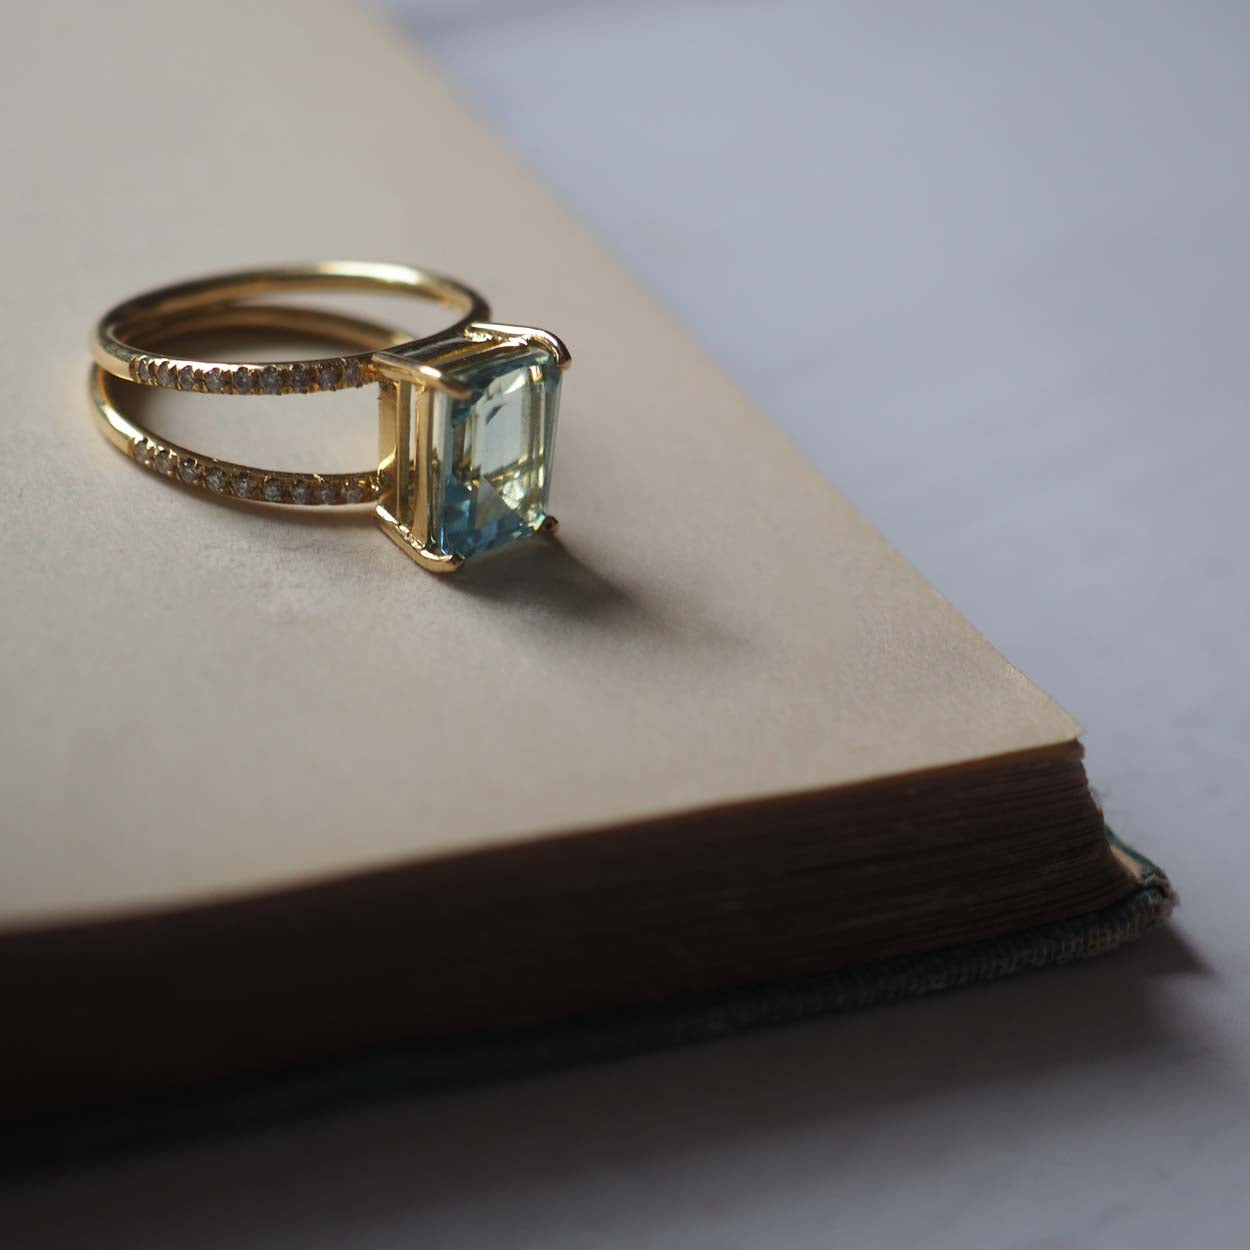 Elegant Emerald-Cut Aquamarine Ring by Bianca Jones Jewellery, handcrafted in London. Features a striking aquamarine stone set on dual gold bands, each adorned with sparkling diamonds.